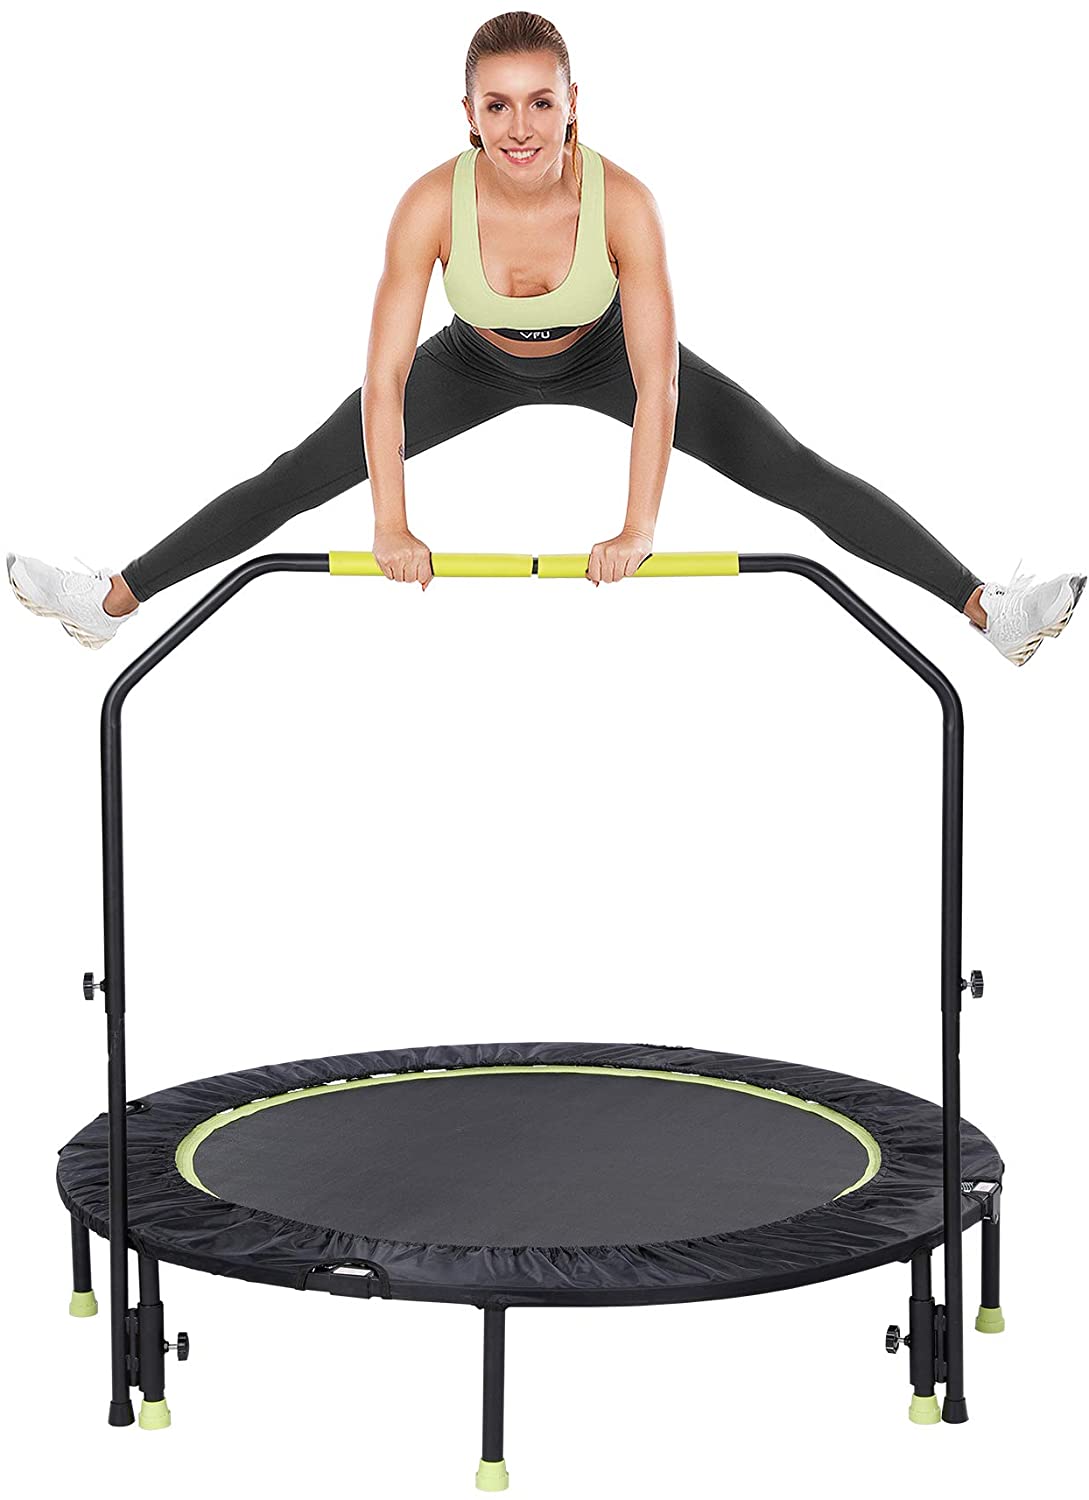 Rhomtree 36/” Mini Trampoline with Handle Exercise Fitness Trampoline Workout for Indoor Outdoor Use Rebounder Trampoline for Kids Adults